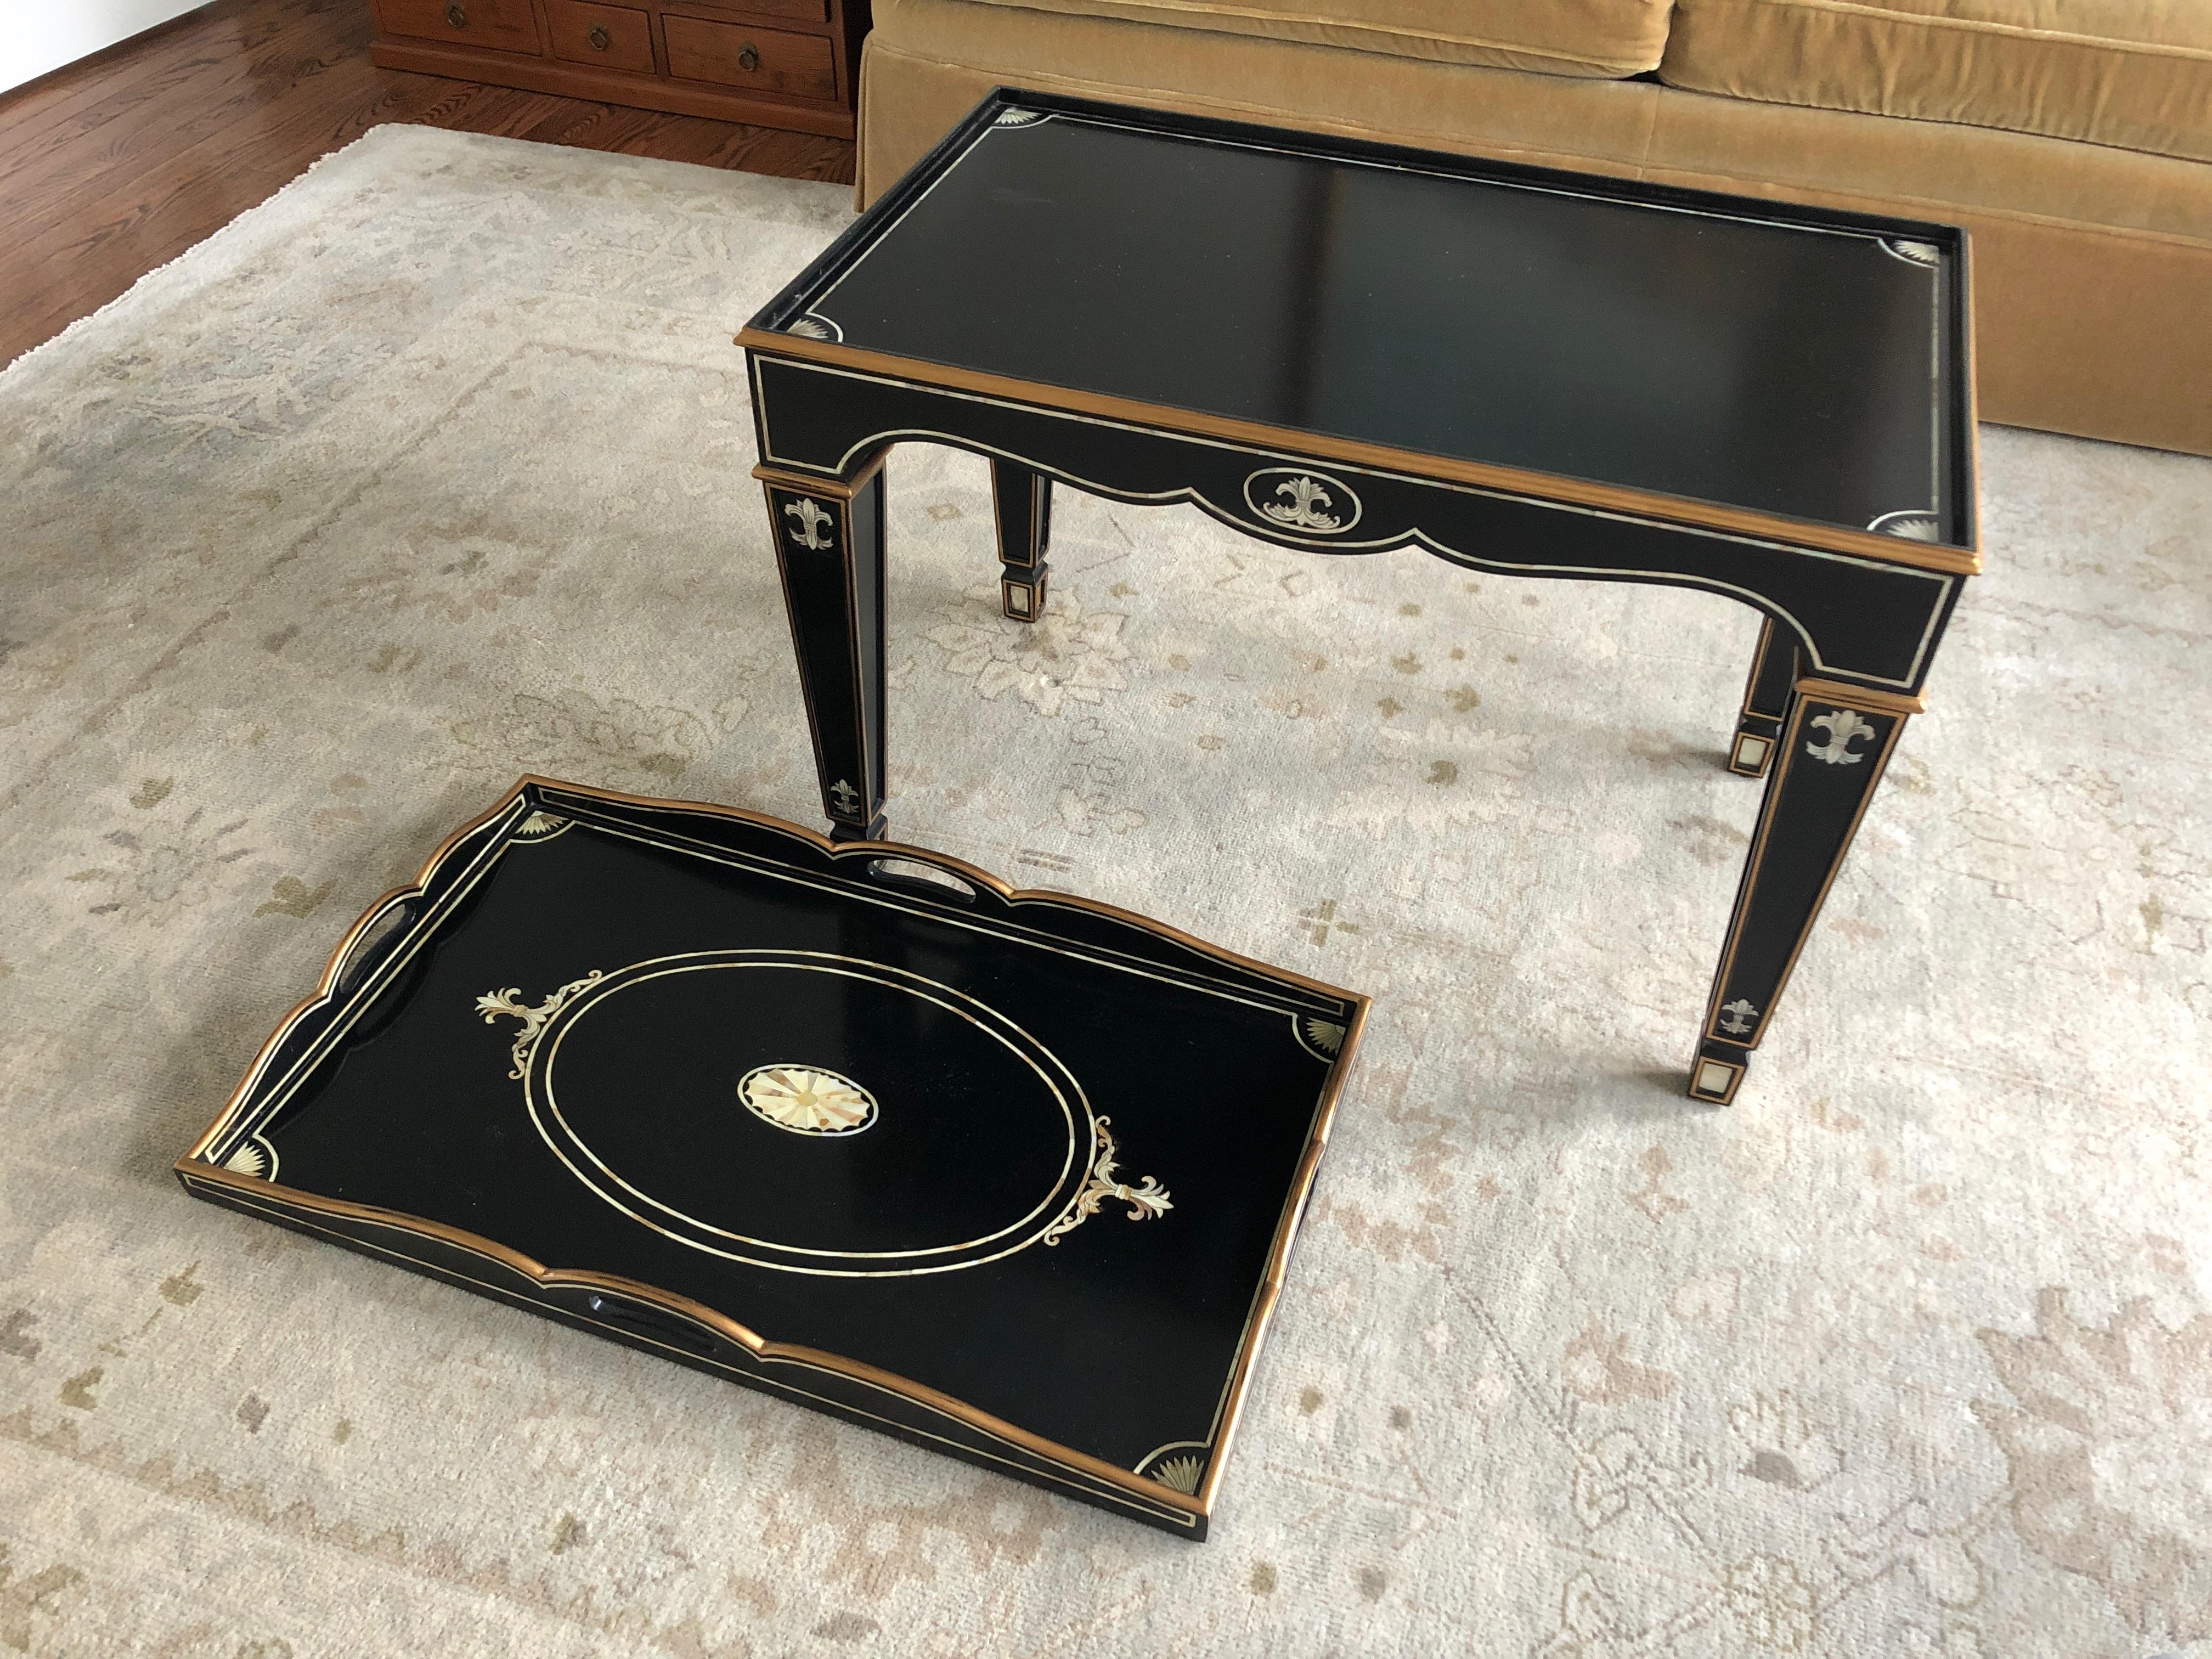 American Gem of a Hollywood Regency Black White and Gold Small Sized Tray Coffee Table